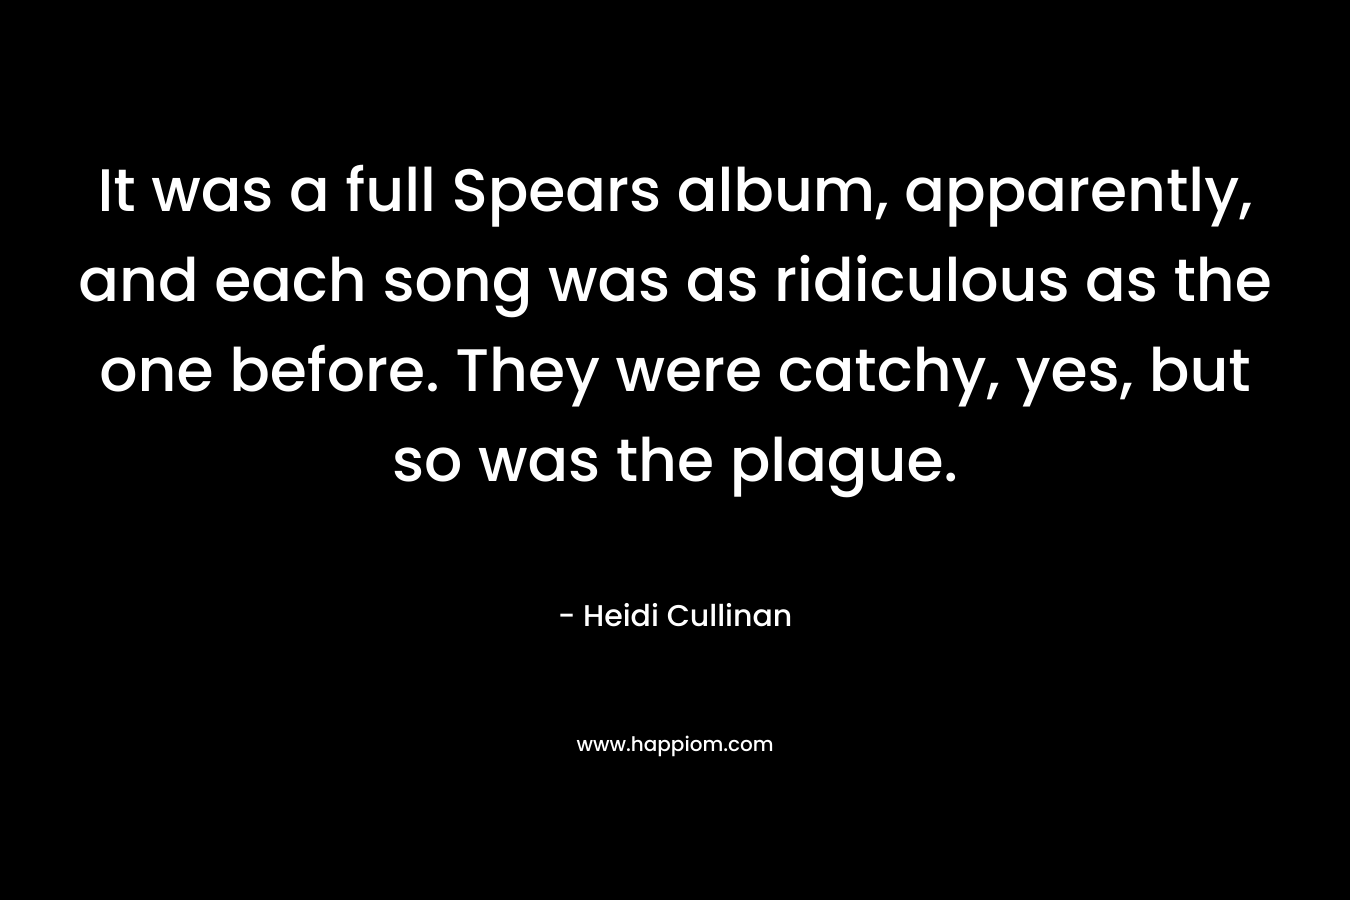 It was a full Spears album, apparently, and each song was as ridiculous as the one before. They were catchy, yes, but so was the plague. – Heidi Cullinan